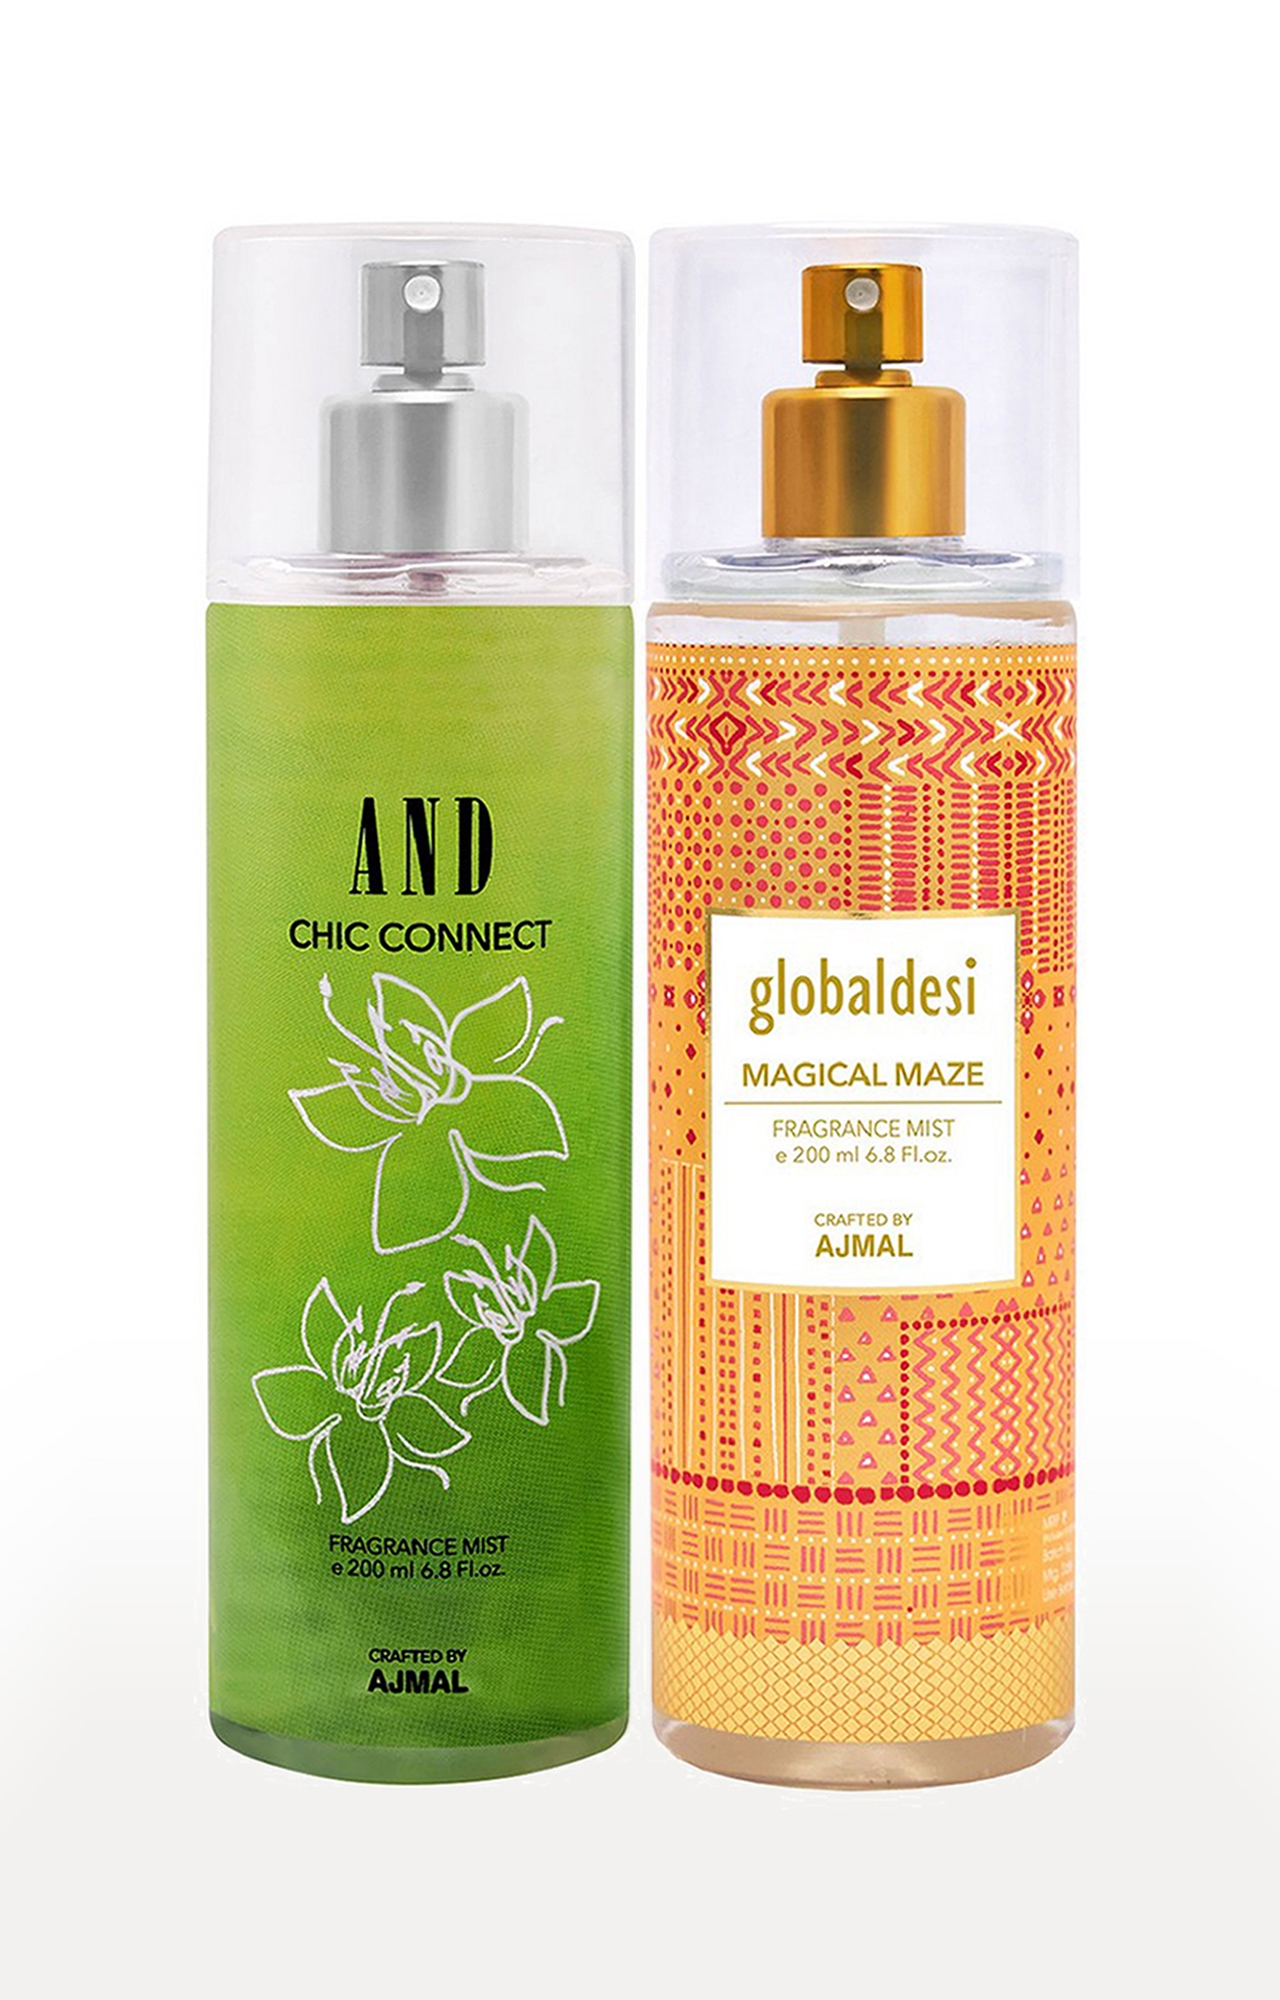 AND Chi Connect Body Mist 200ML & Global Desi Magical Maze Body Mist 200ML Long Lasting Scent Spray Gift For Women Perfume FREE